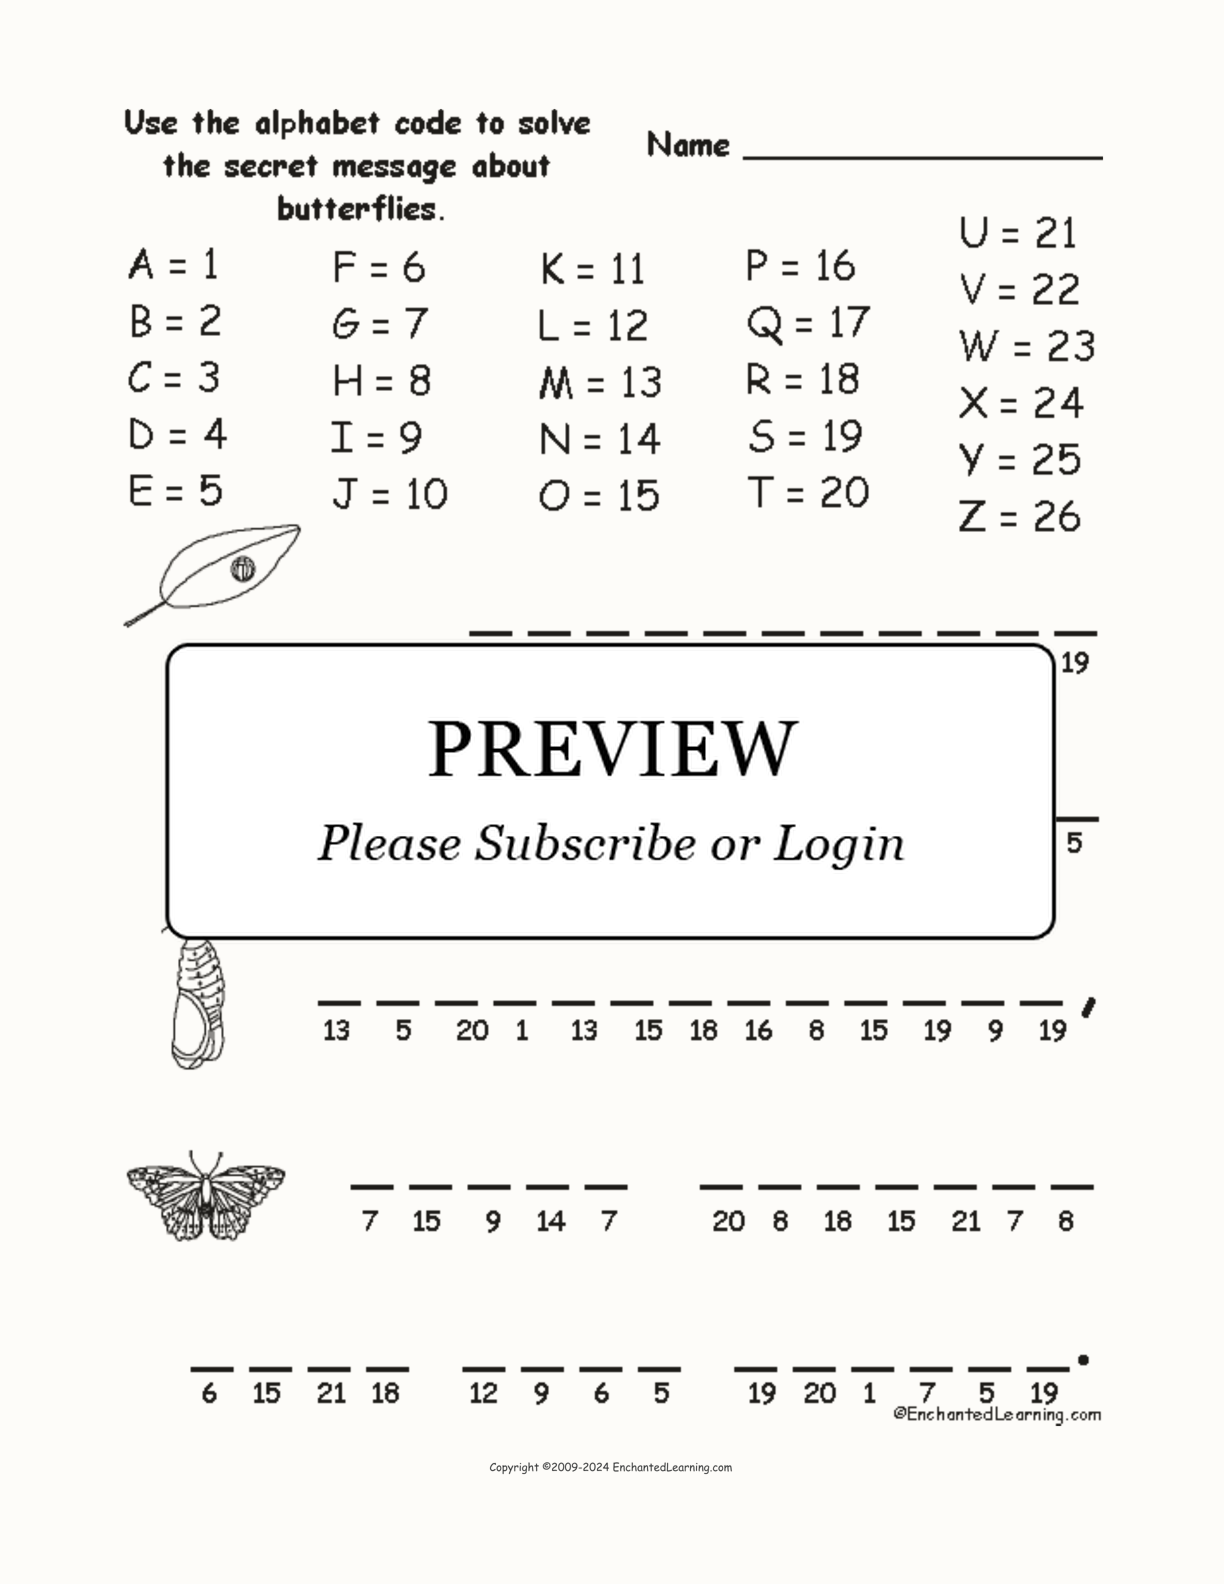 Butterfly Alphabet Code interactive worksheet page 1